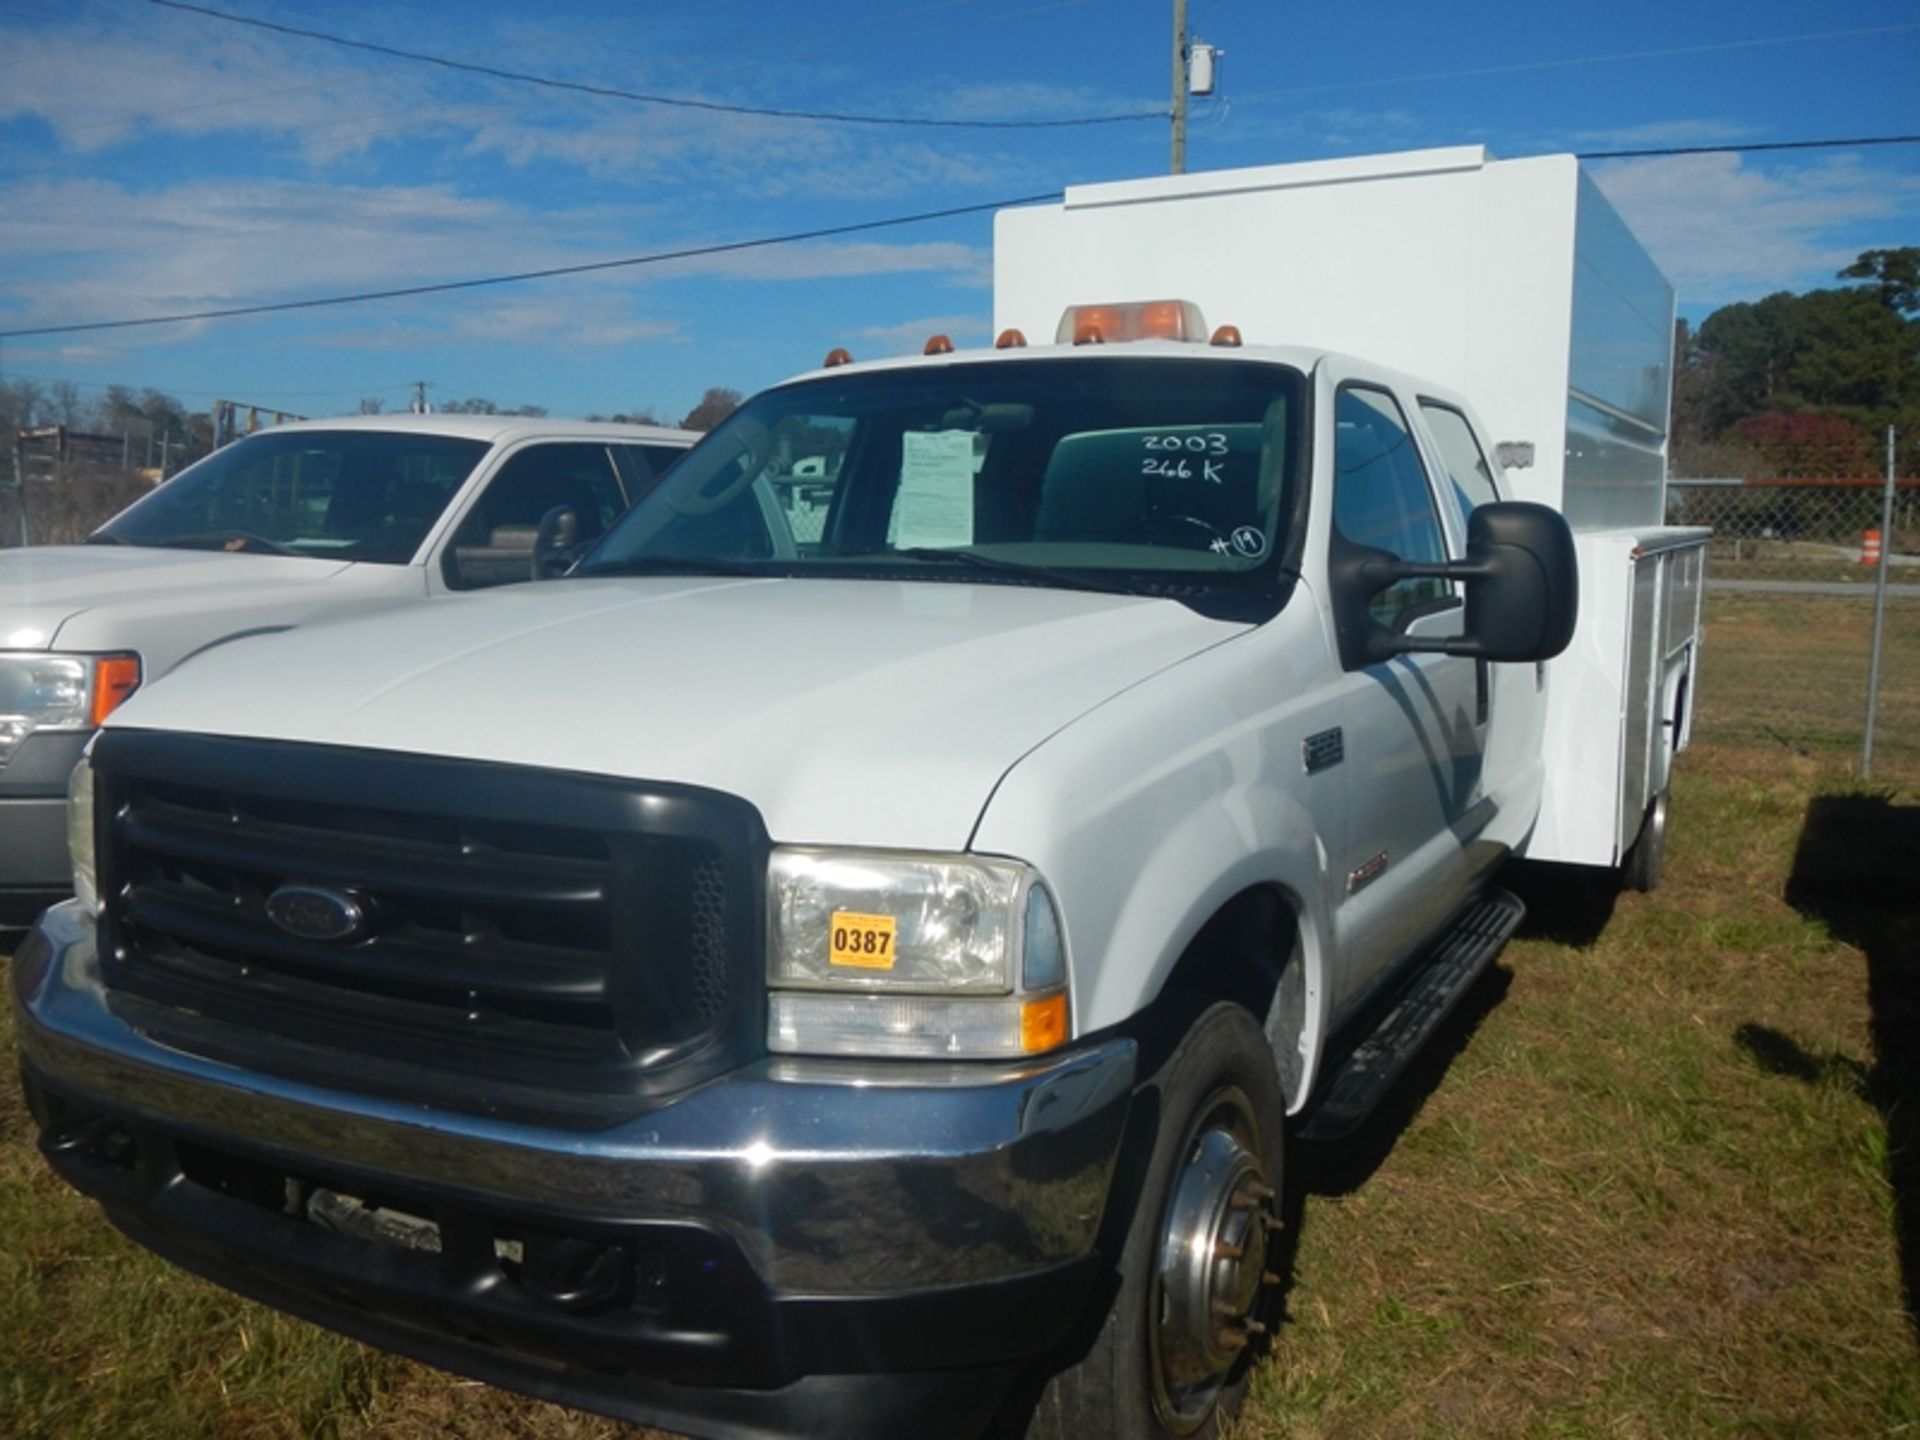 2003 FORD F550 dsl, crew cab, covered utility body - 266,663 miles - 1FDAW56P33EB48960